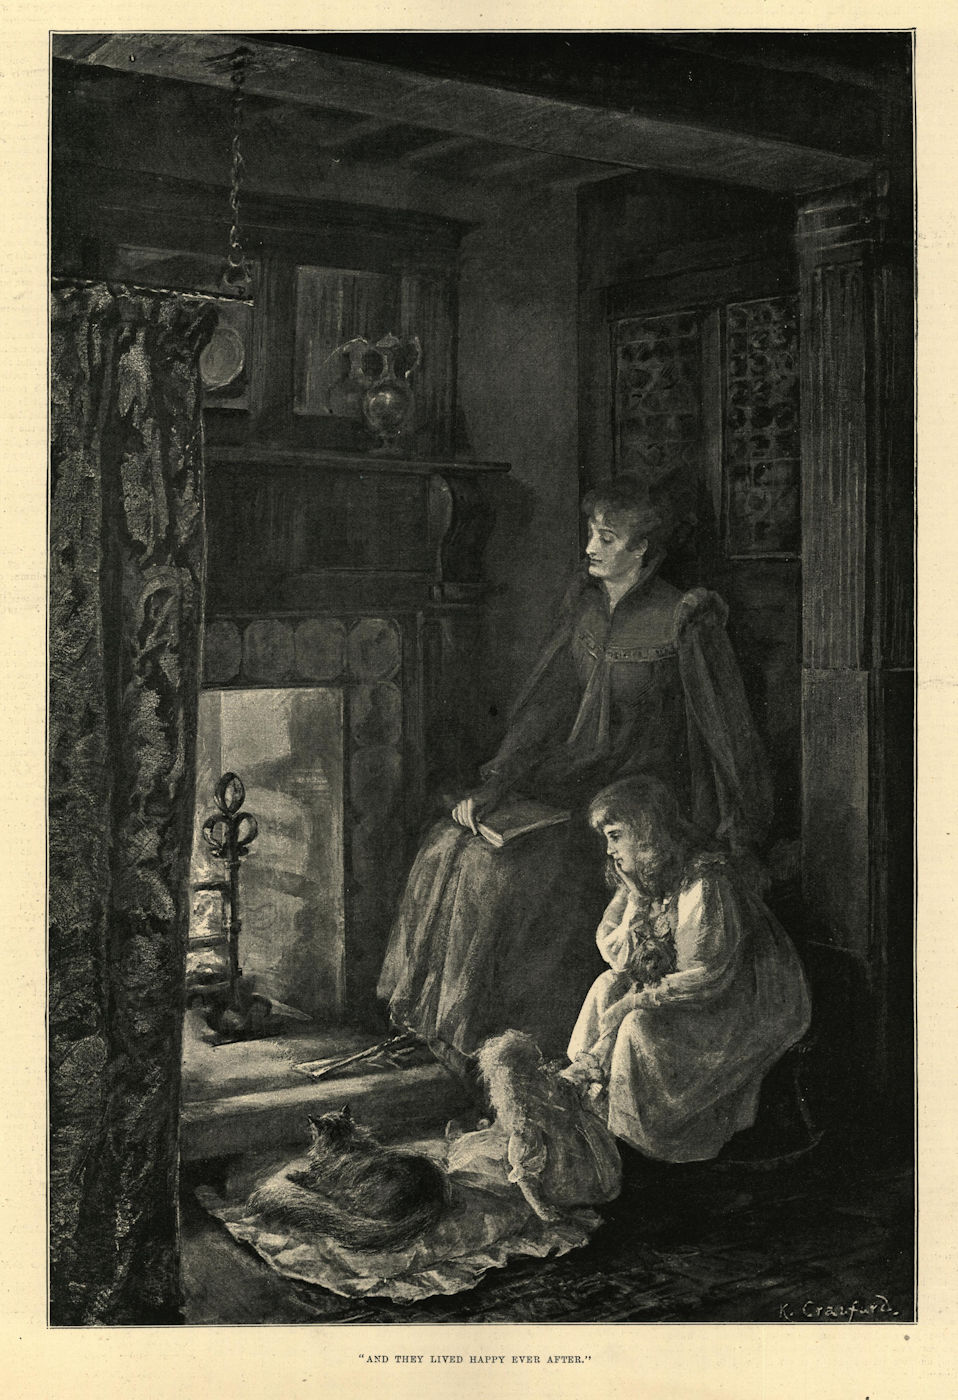 Associate Product "And they lived happily ever after". Family fireplace 1892 ILN full page print